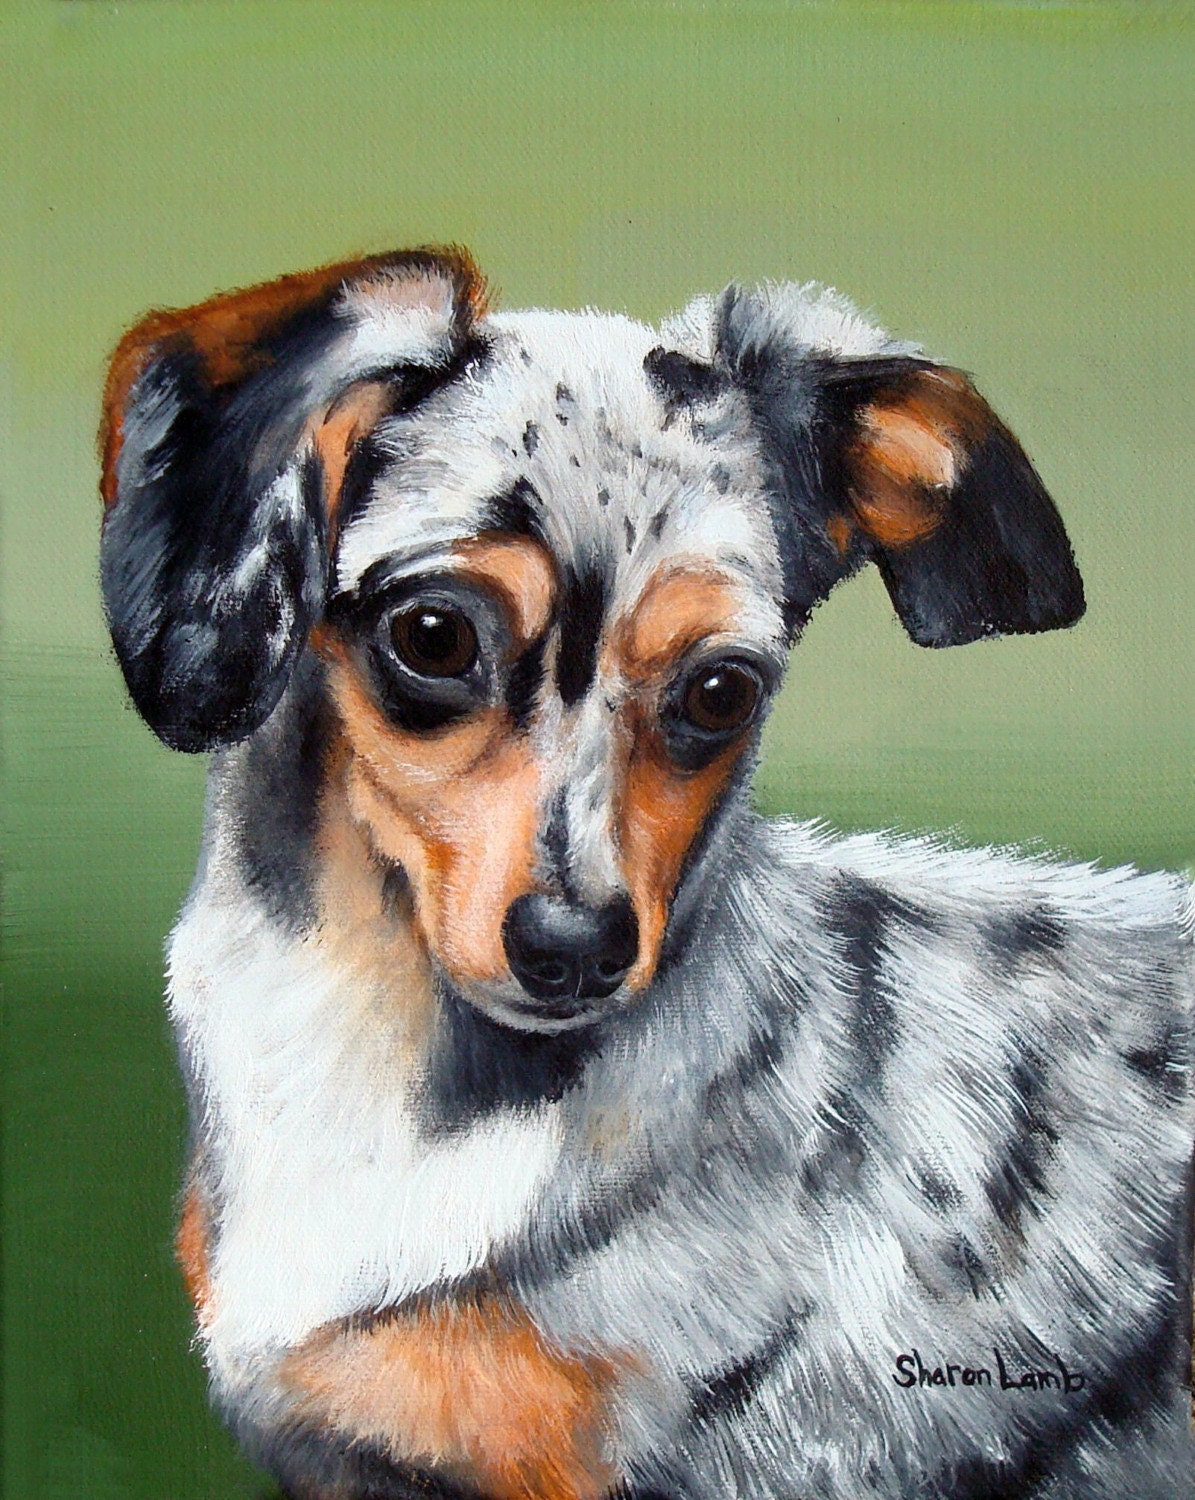 Hand Painted 8x10 Custom Commissioned Pet Portrait Painting any Animal Dog Cat or Horse